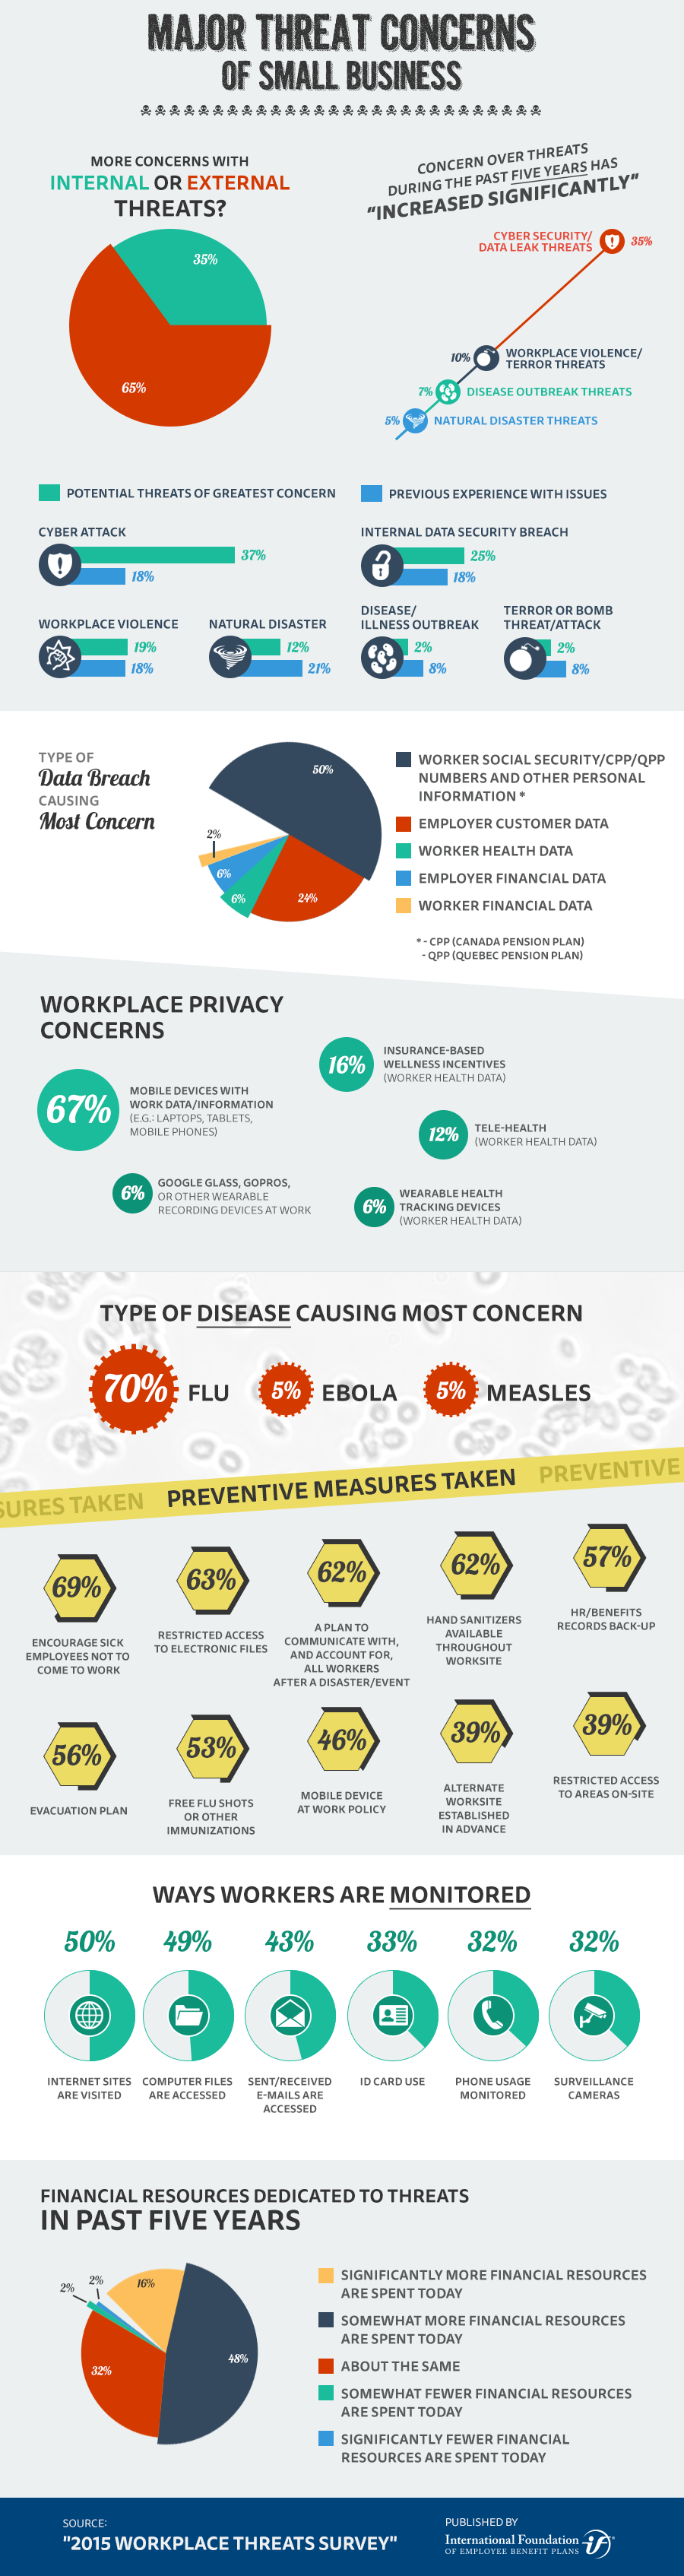 Infographic: Major Threat Concerns of Small Business